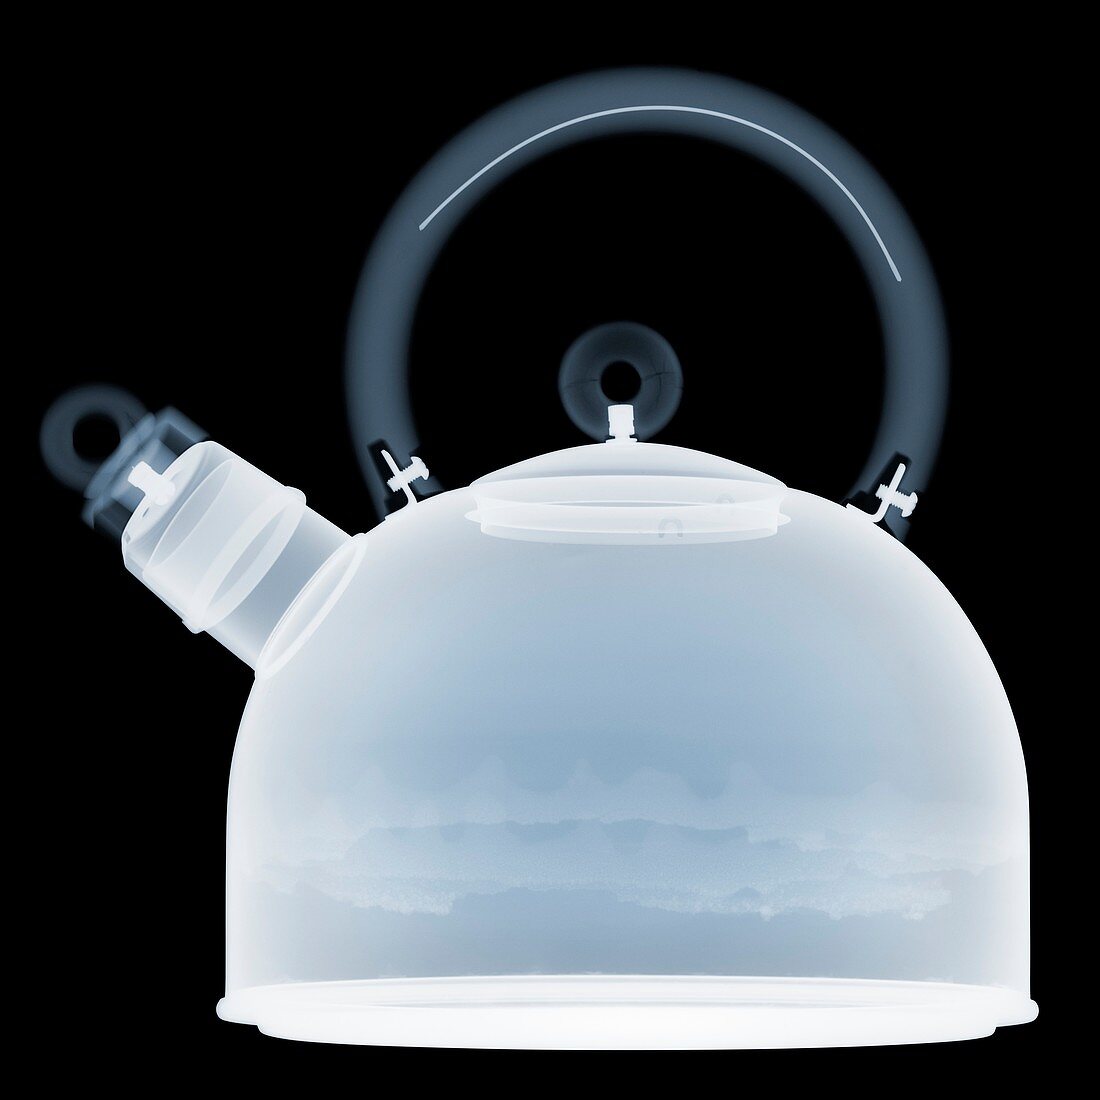 Kettle, X-ray